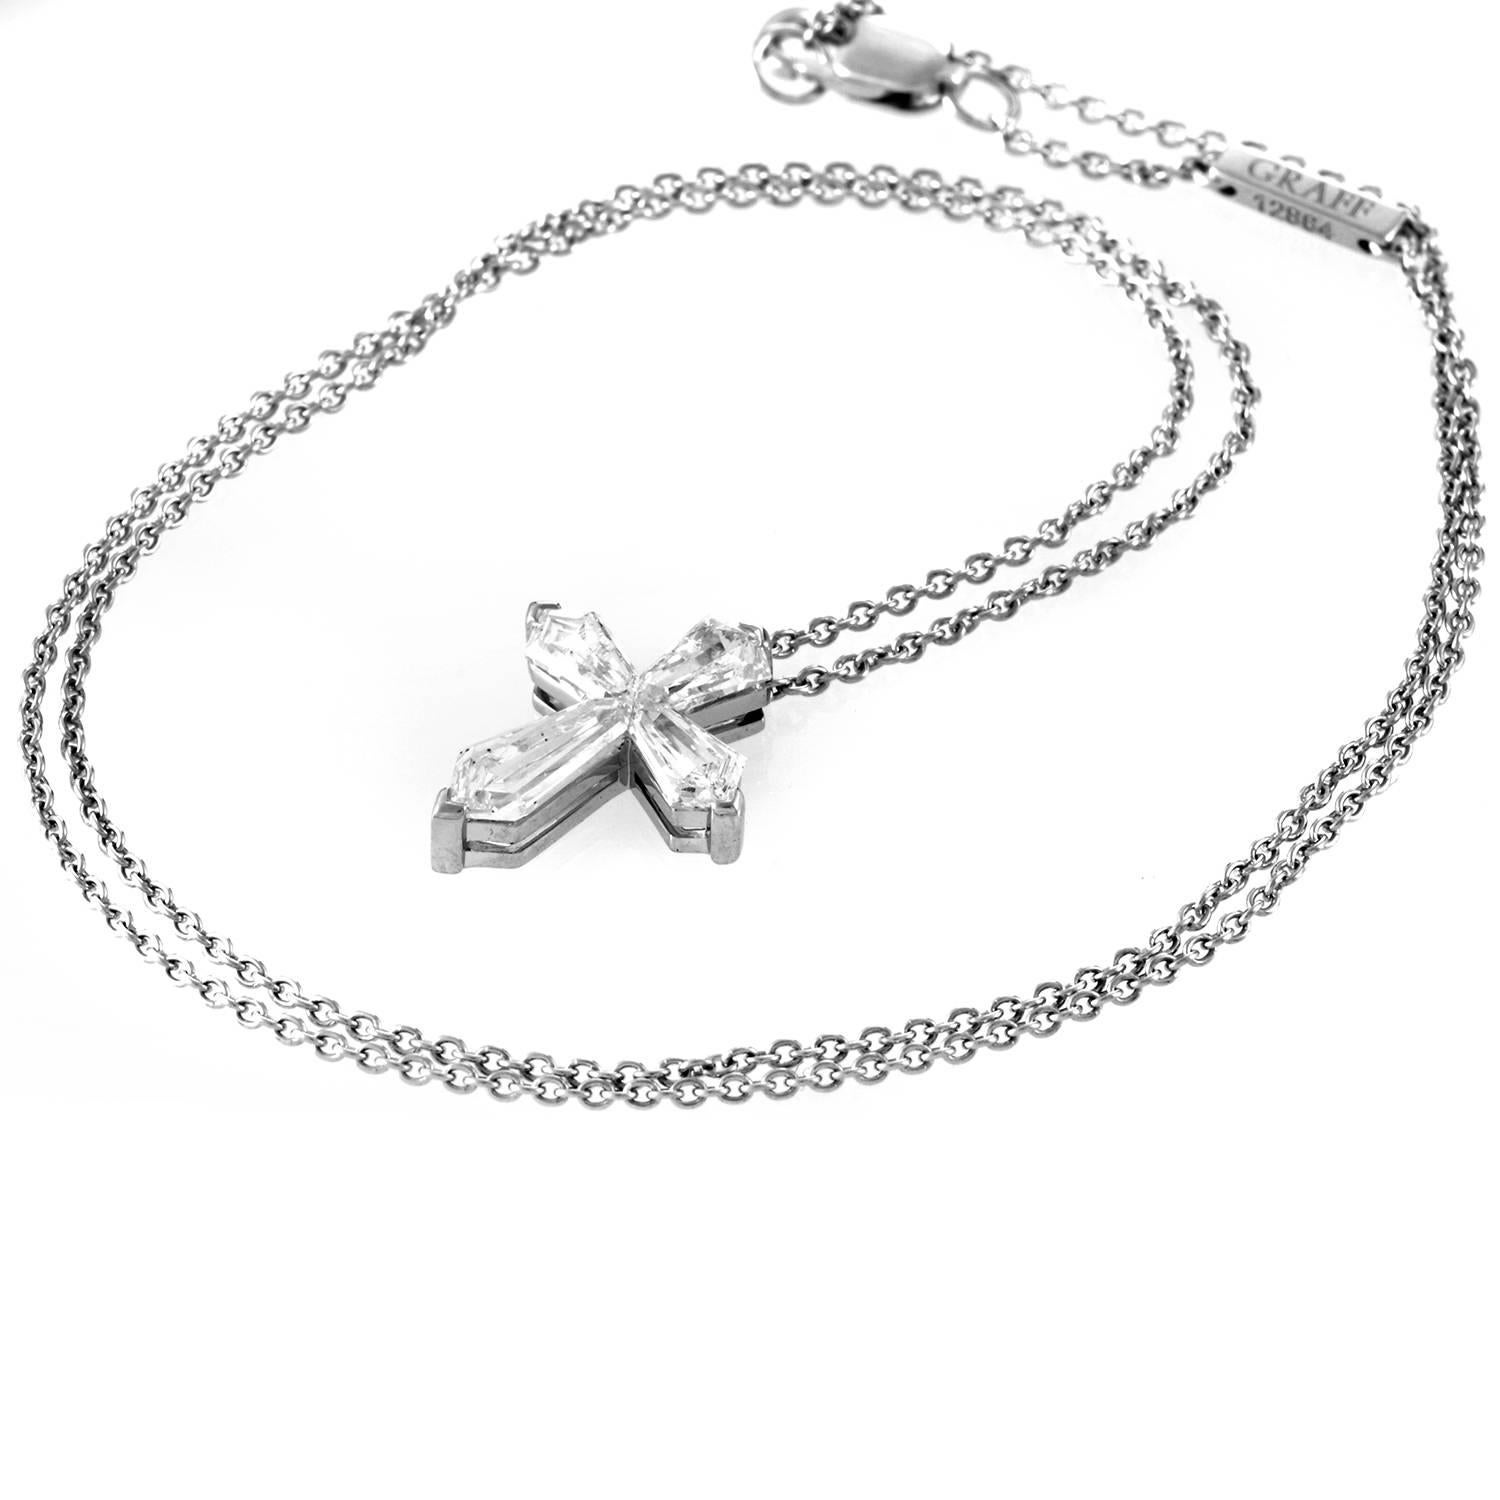 Diamonds provide shimmering presence to this compelling pendant necklace from Graff. The 1.25ct diamonds are bullet cut for a dynamic, tapering line, its four points converging into a cinching bow at the center. The precious stones shaping the cross